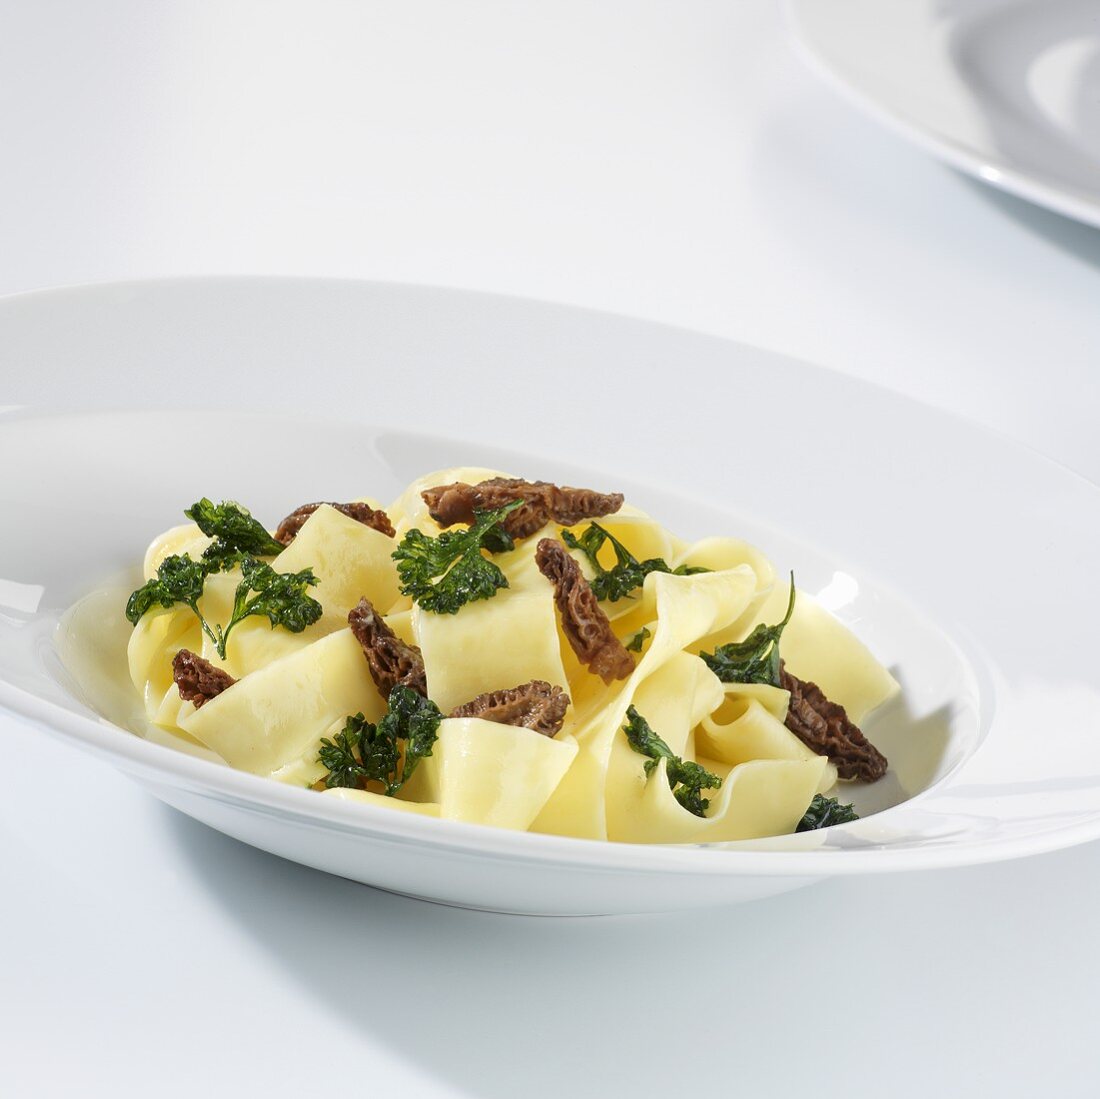 Pappardelle with morel mushrooms and parsley